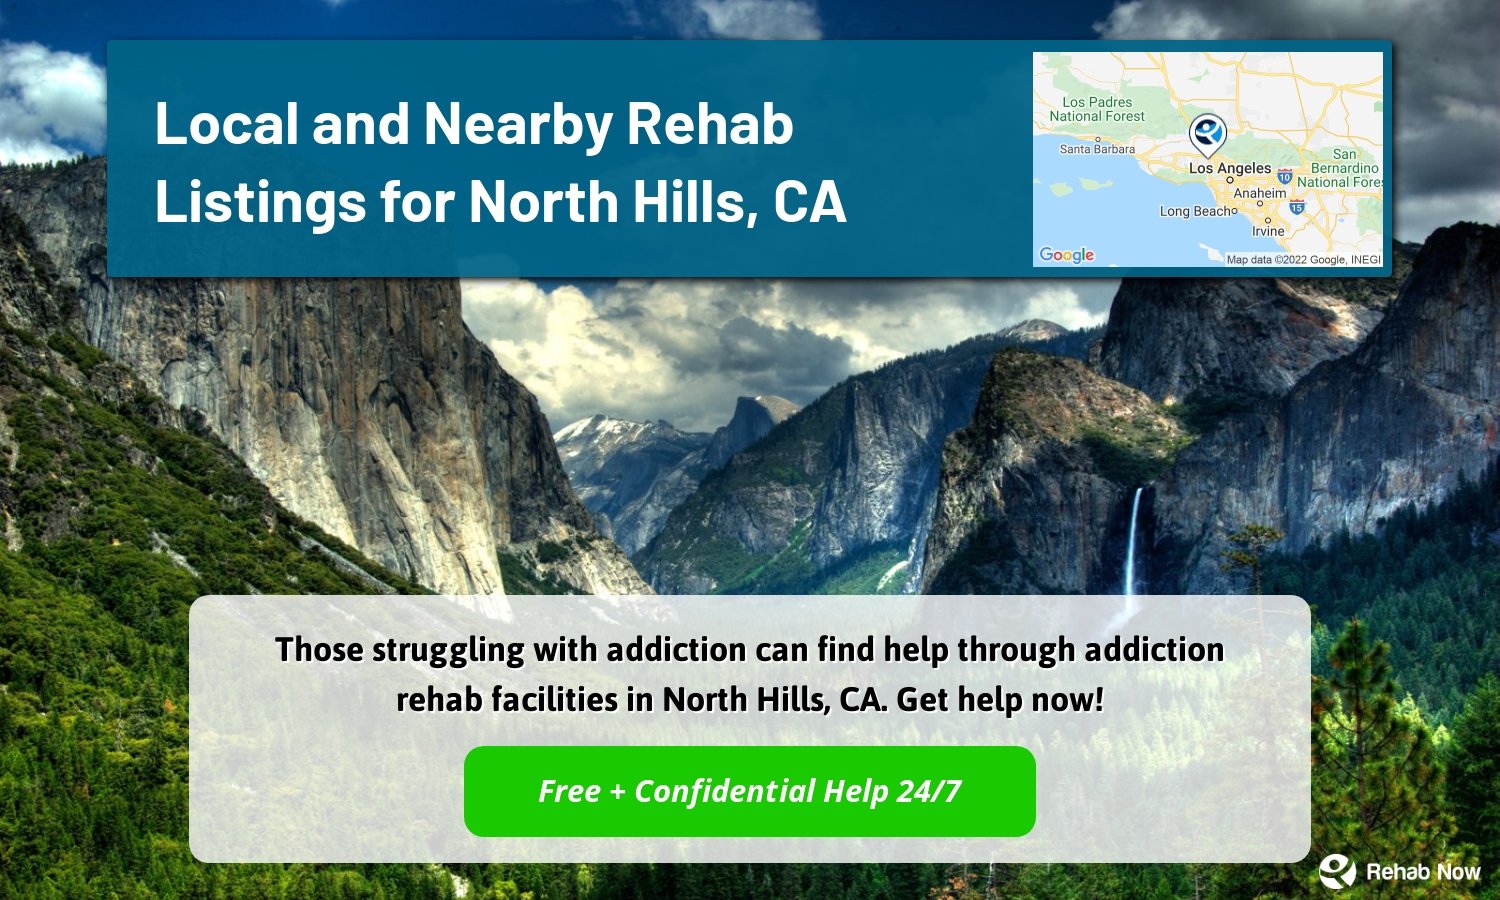 Those struggling with addiction can find help through addiction rehab facilities in North Hills, CA. Get help now!